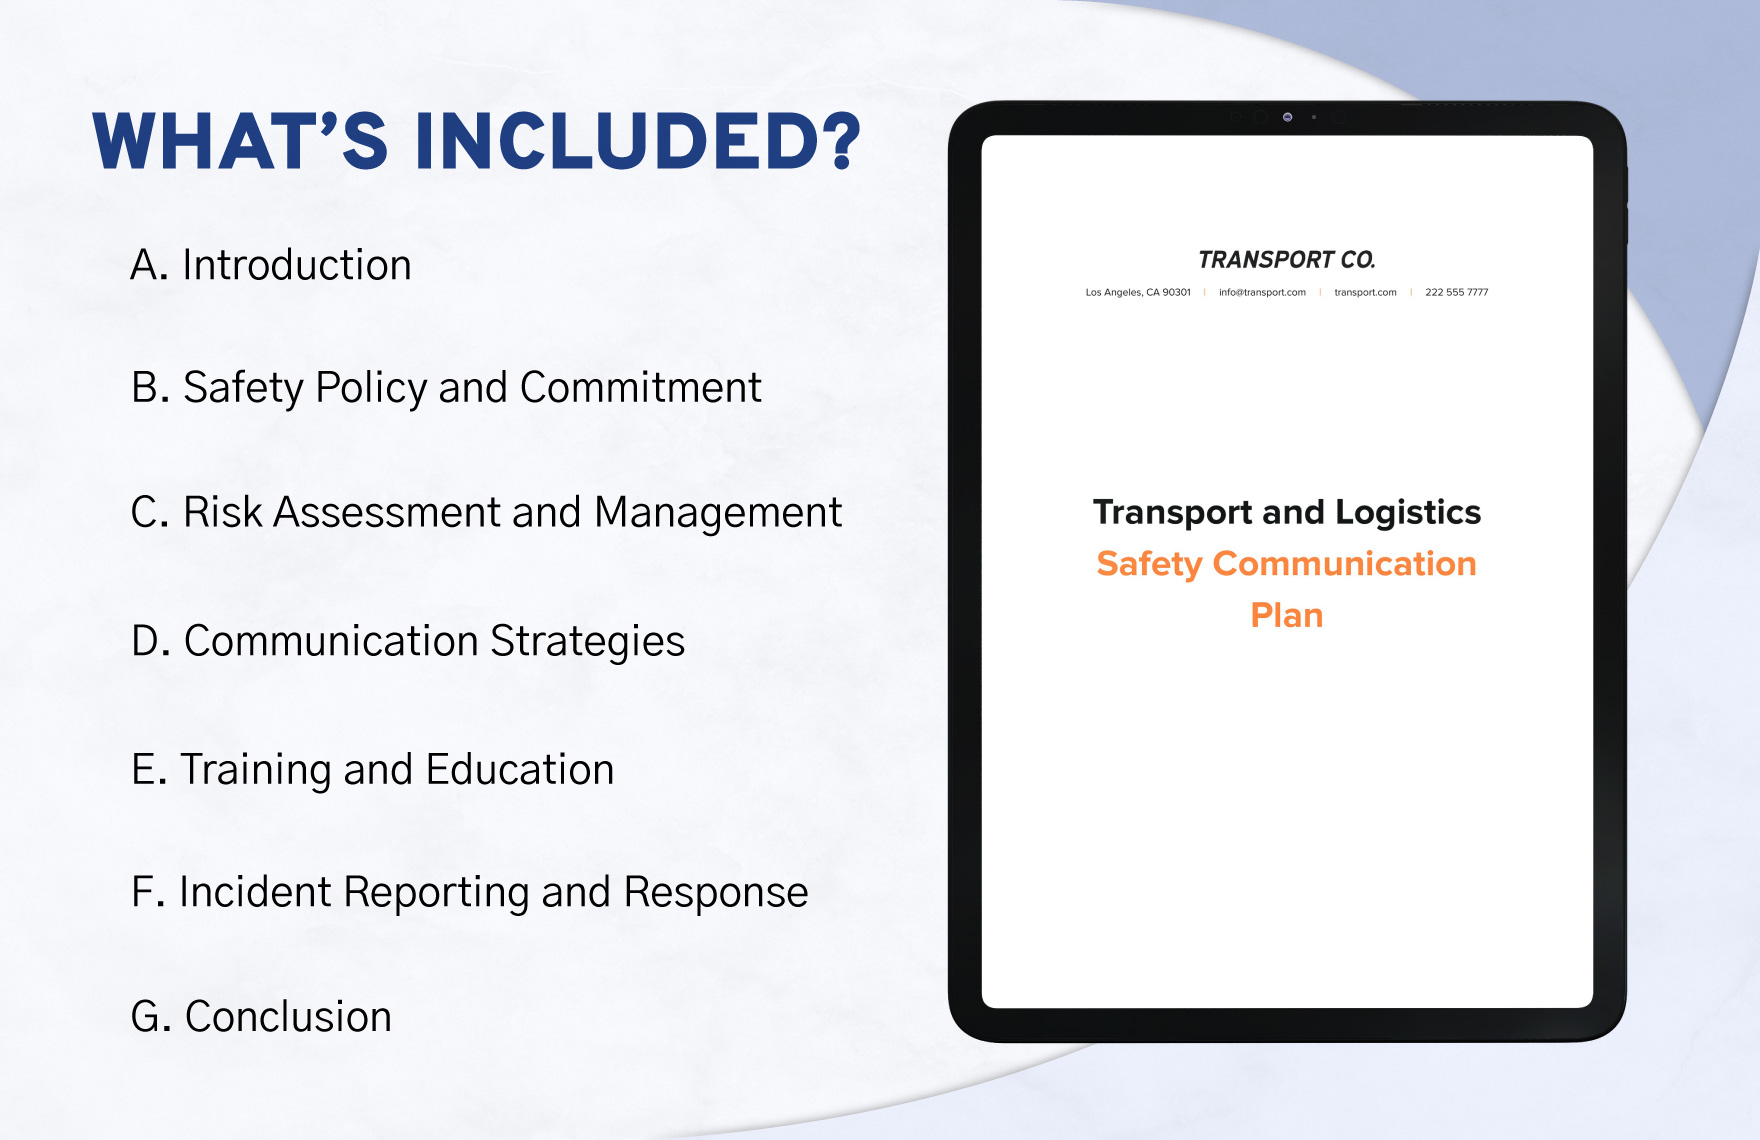 Transport and Logistics Safety Communication Plan Template